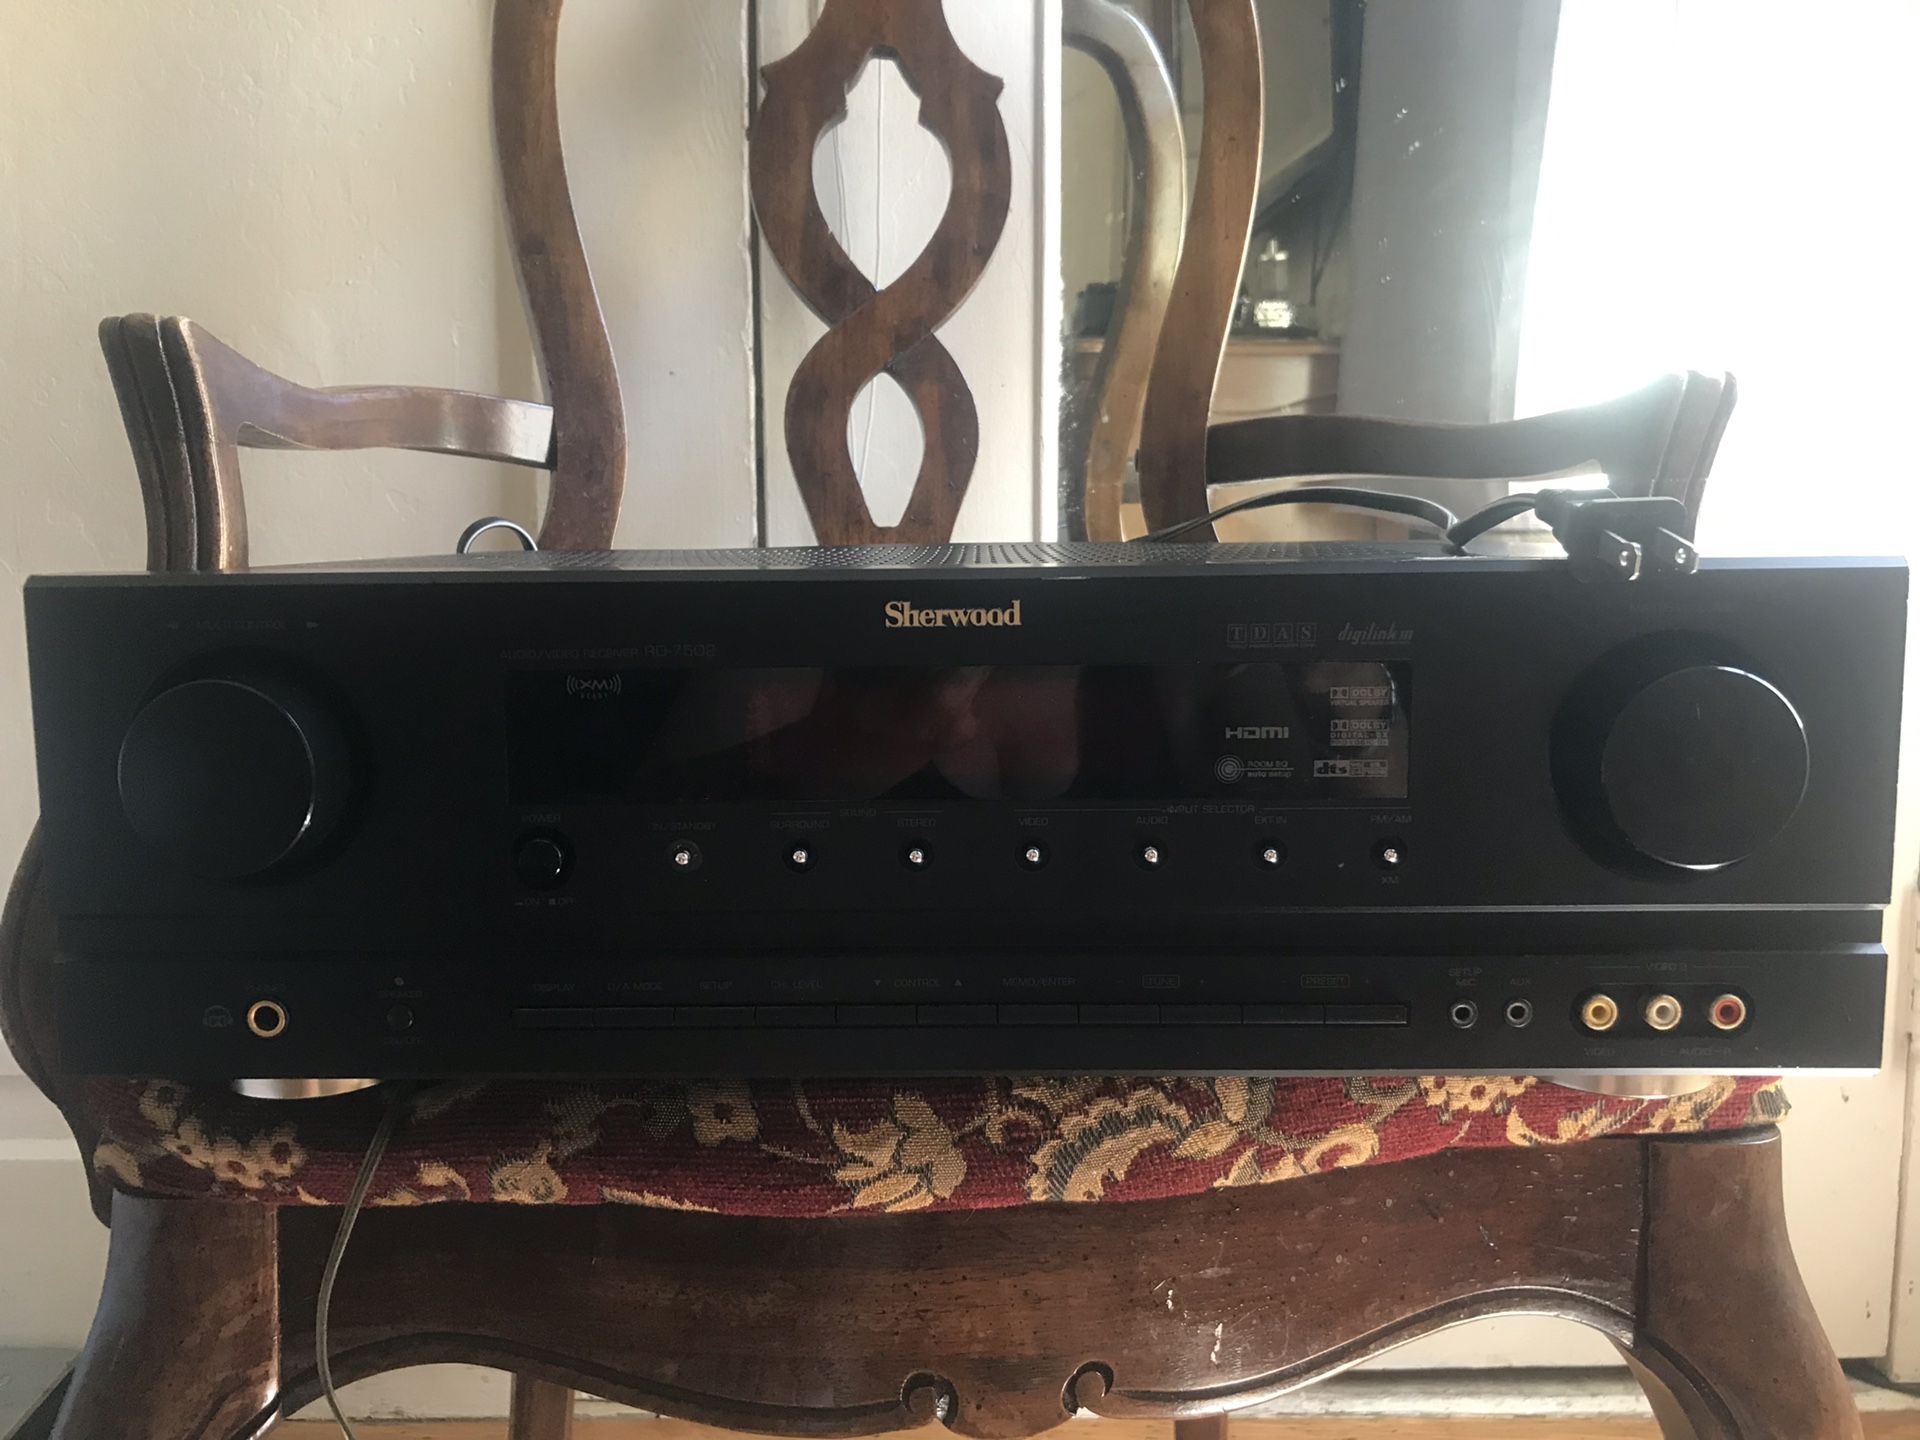 Sherwood Audio/Video Receiver Stereo System